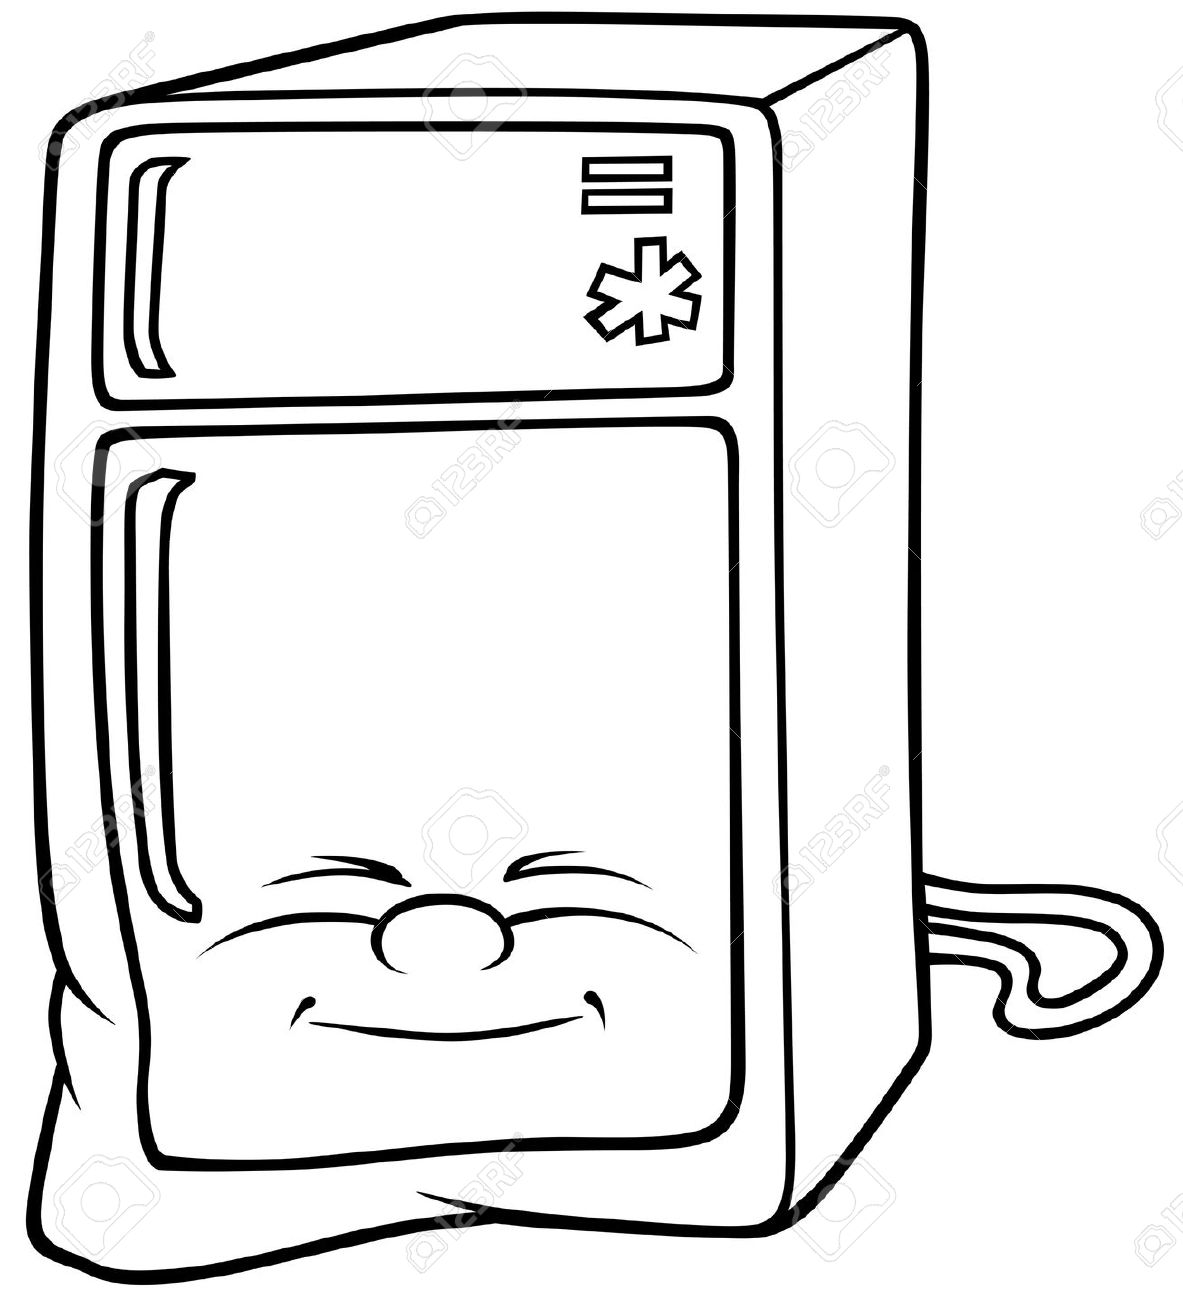 Cartoon Refrigerator Clipart | Free download on ClipArtMag